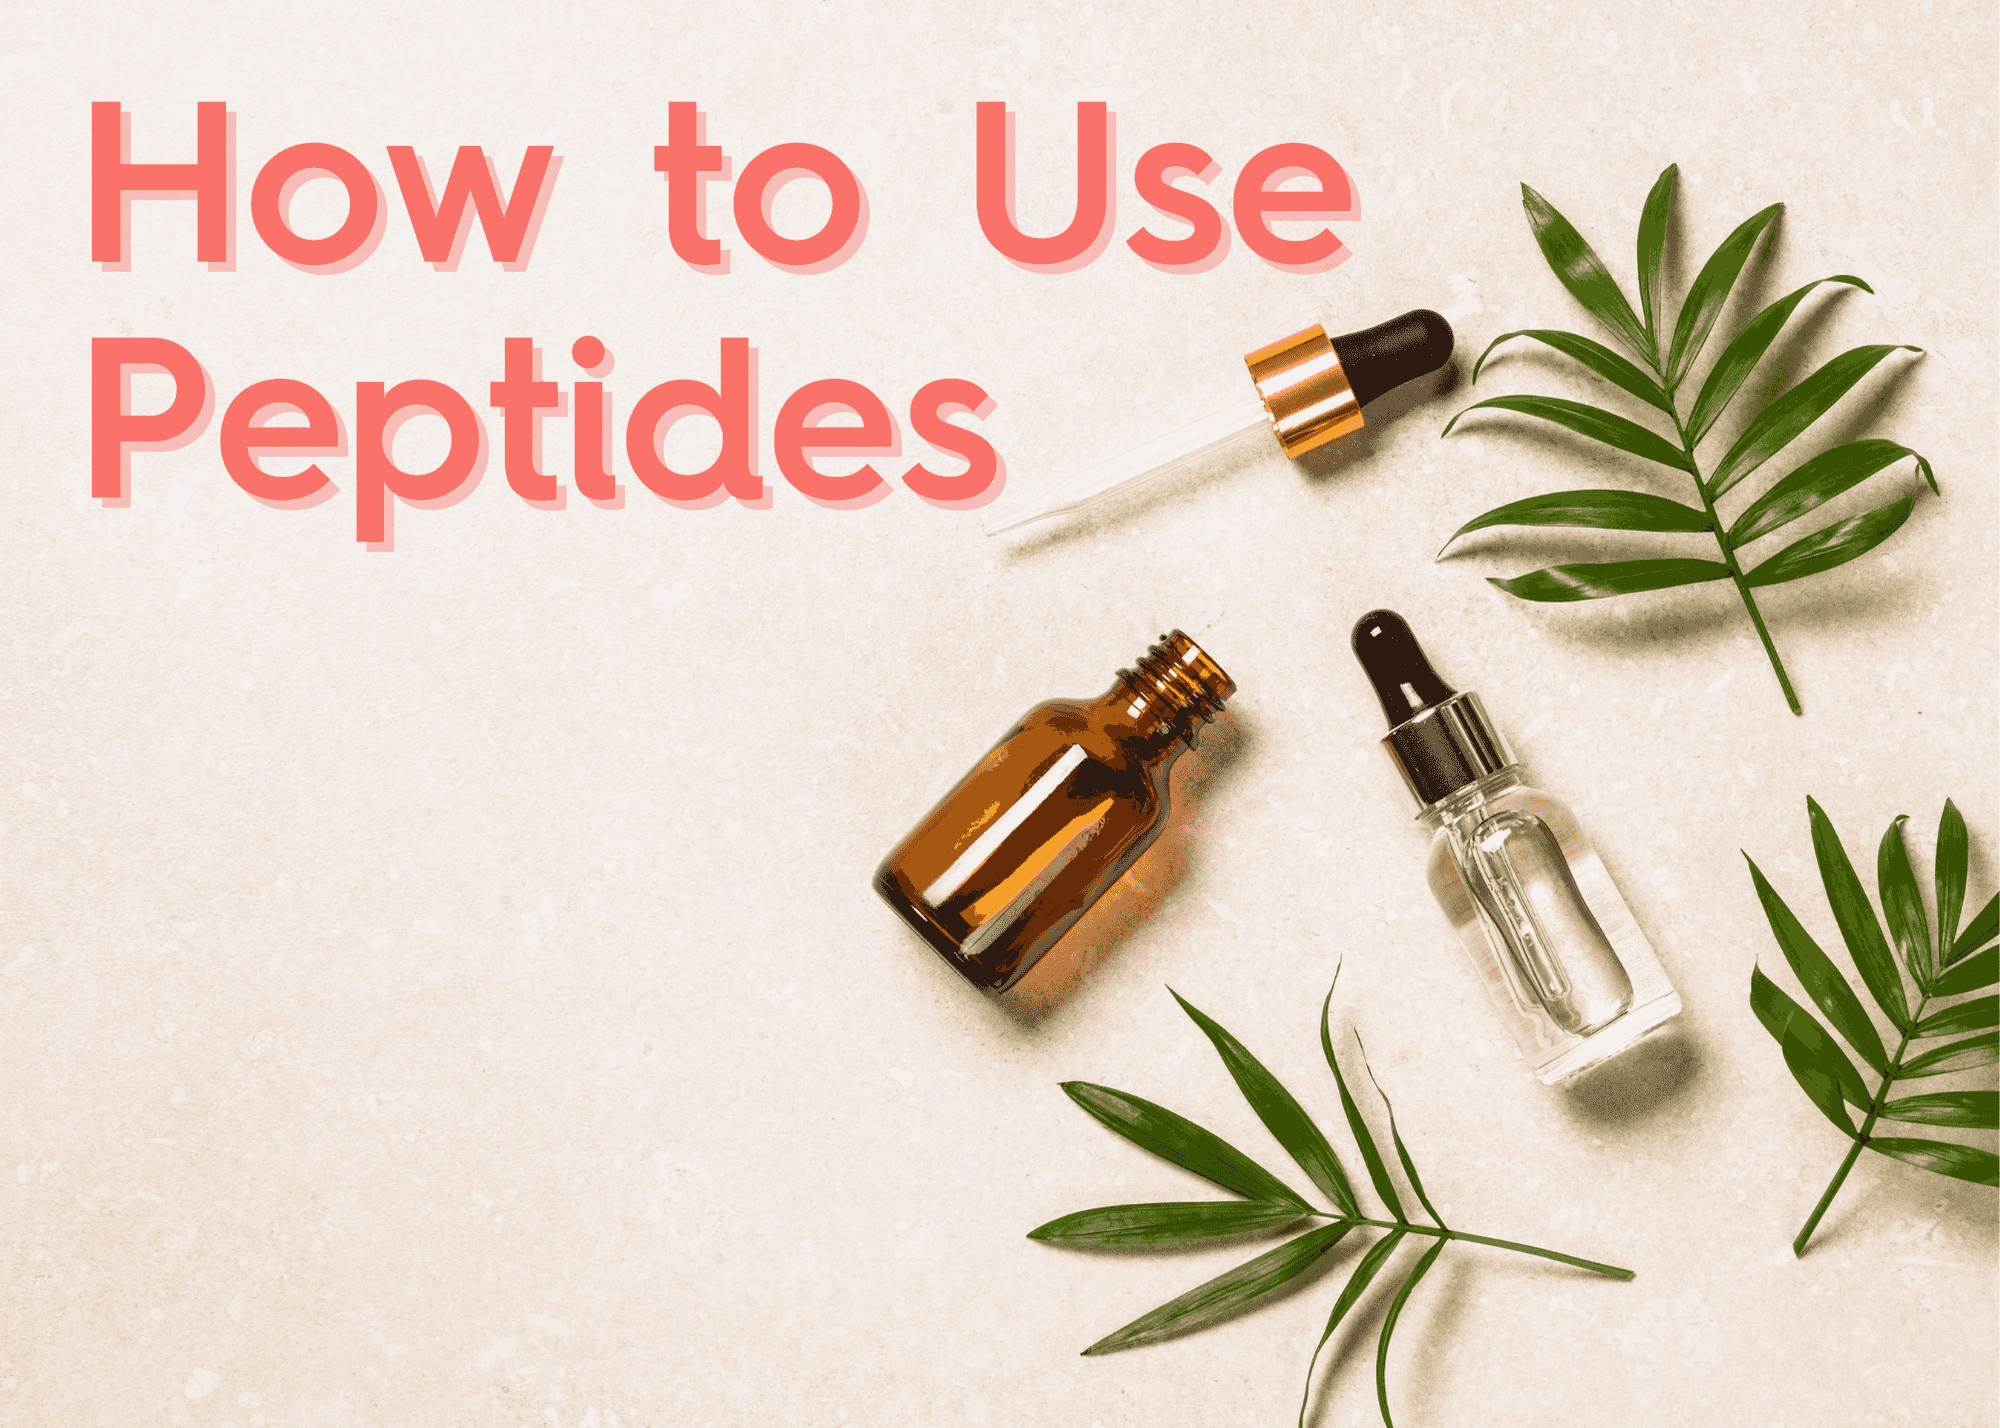 how to use peptides in skin care, and how to add to finished products. Bottles laying flat on khaki background with leaves around